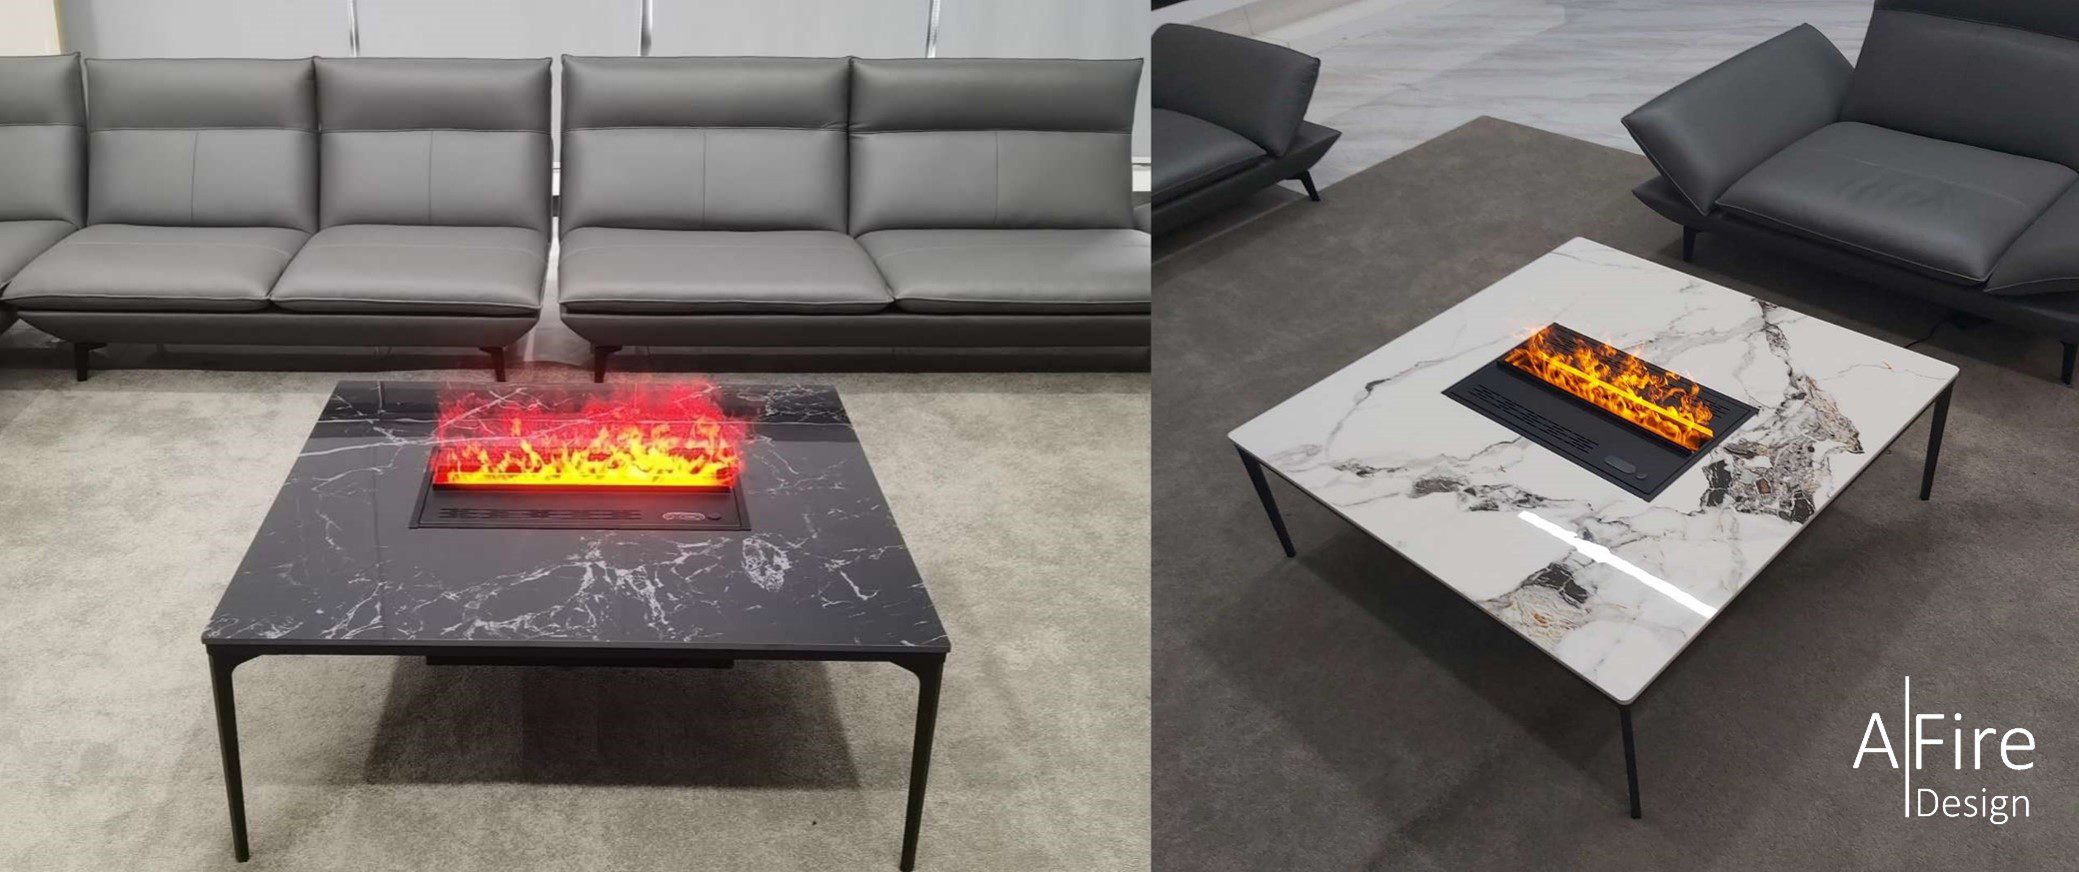 Fireplace table with water vapor insert LOU